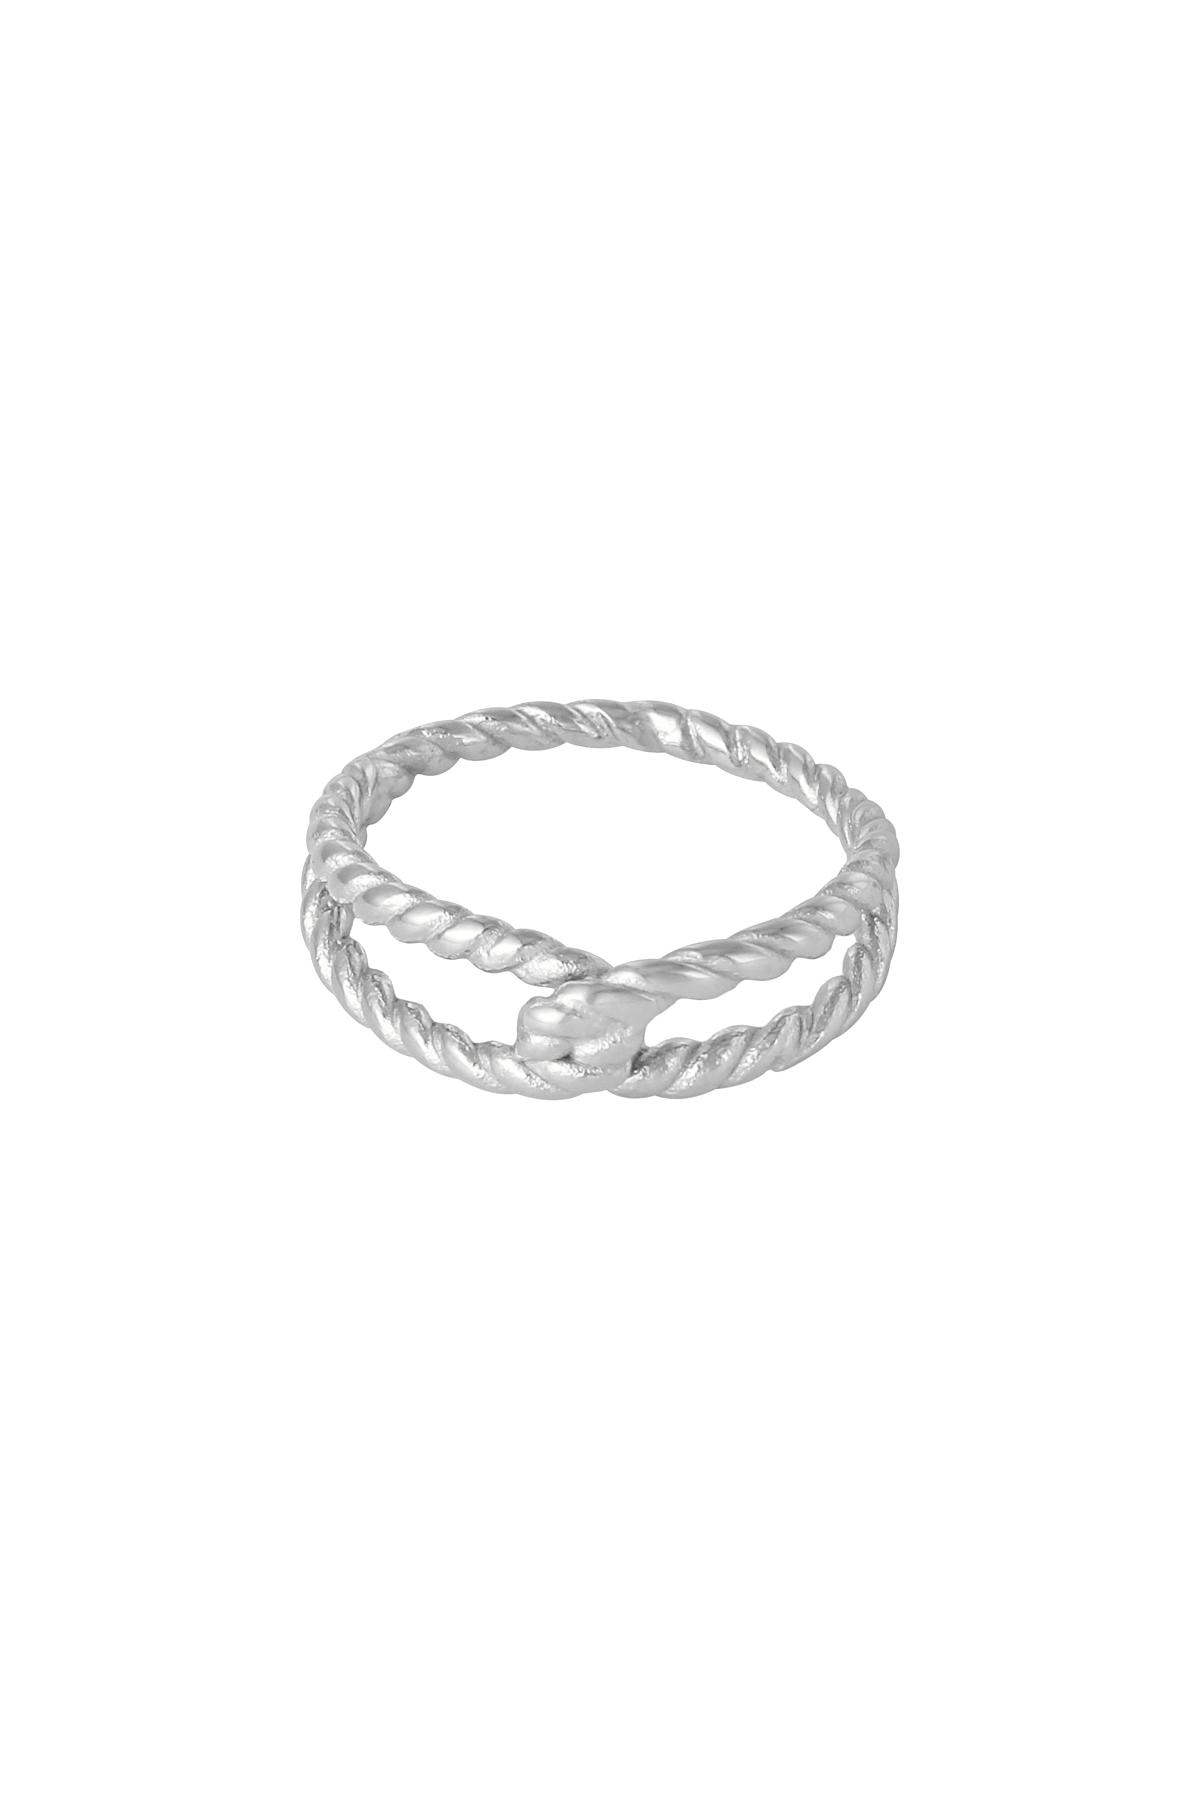 Ring Twisted Rope Silver Stainless Steel 17 